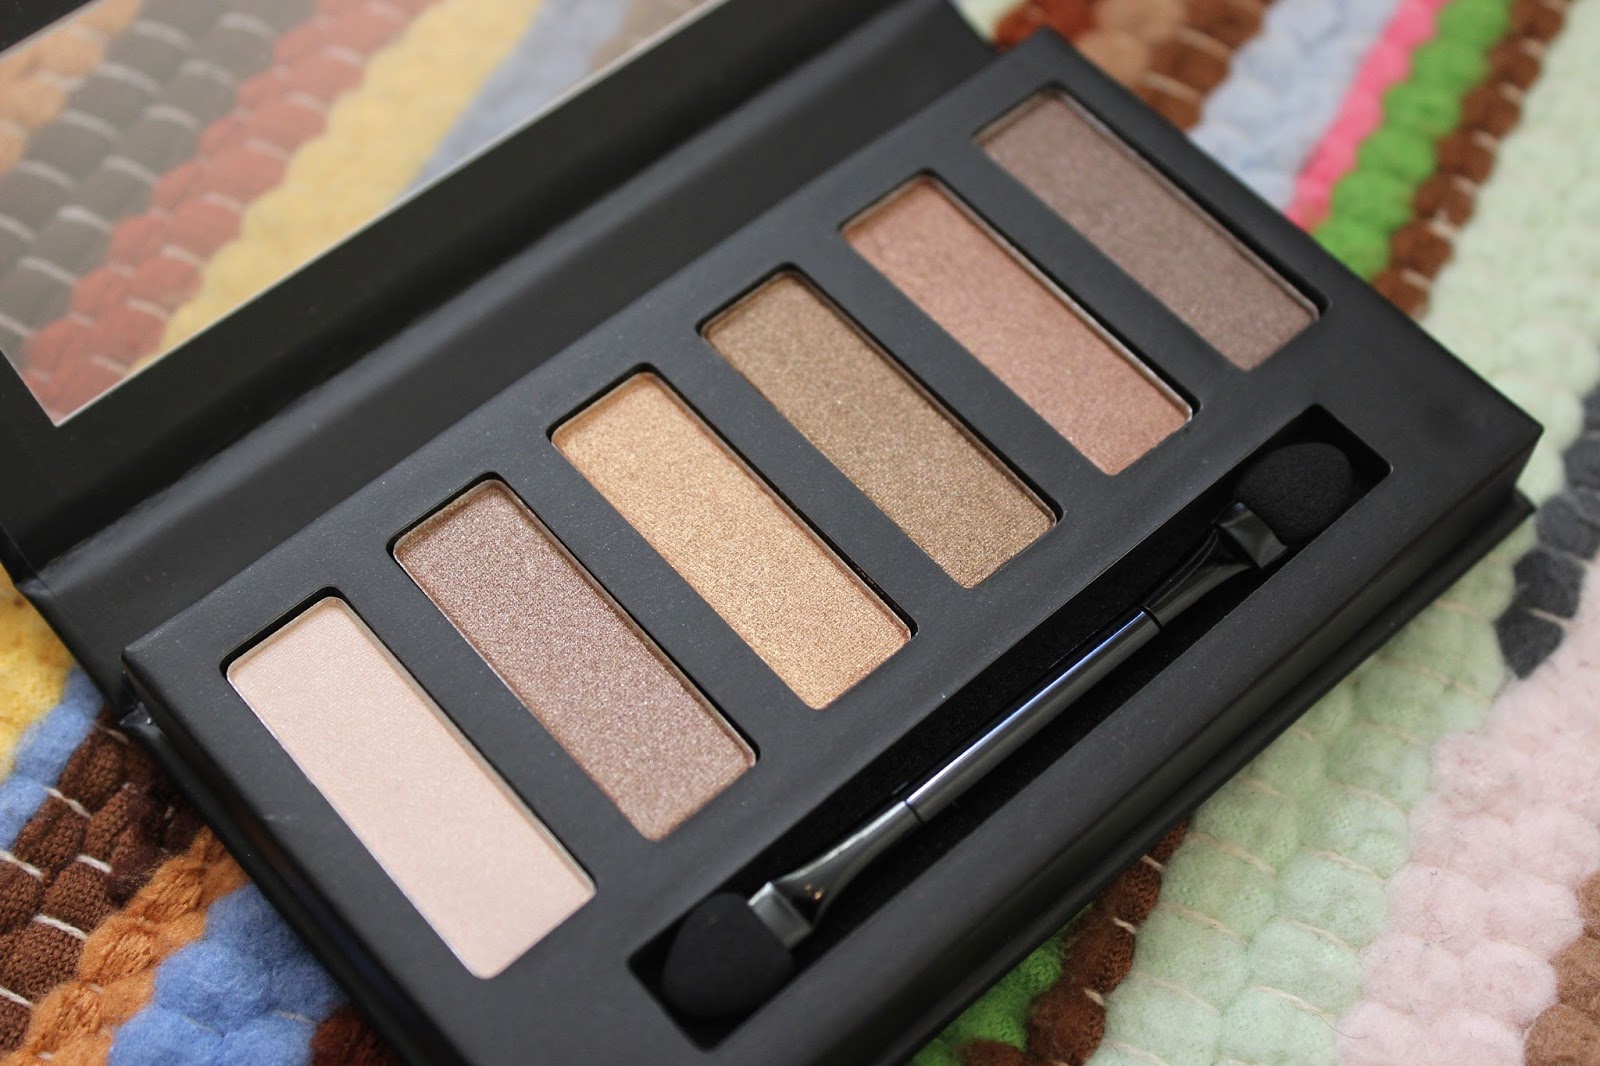 URBAN DECAY NAKED 3 PALETTE - Lily Pebbles